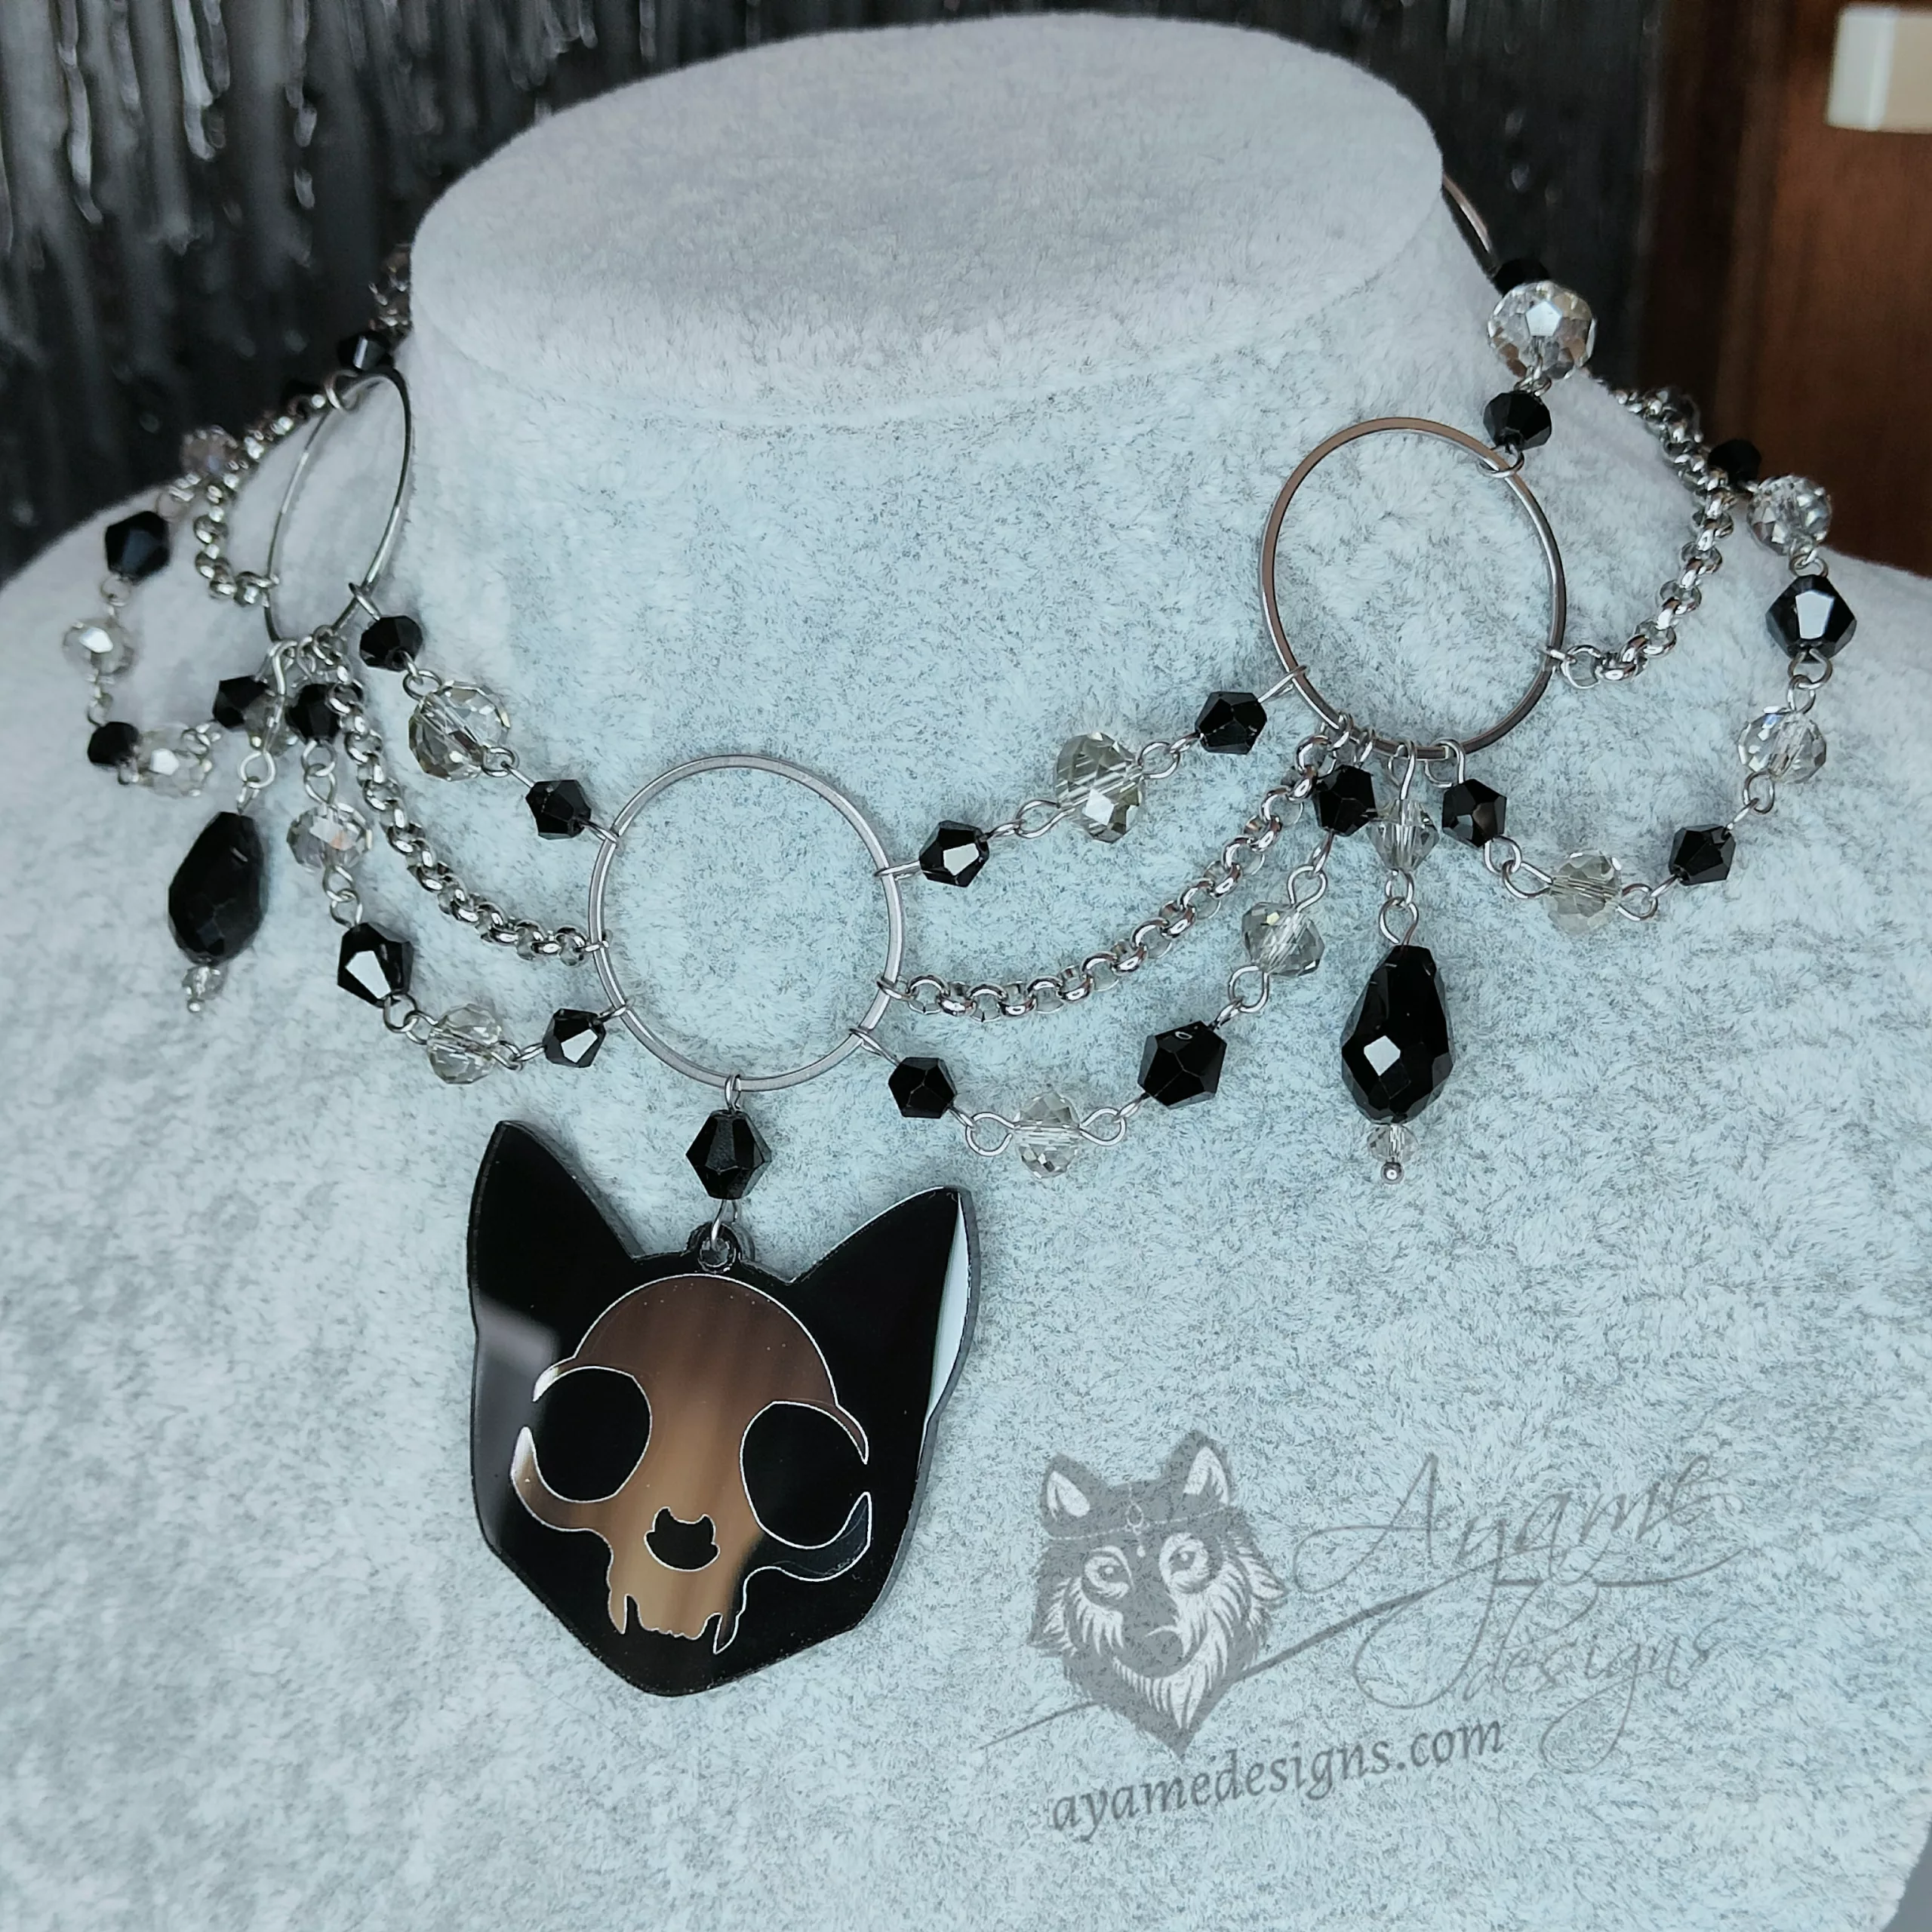 Handmade choker necklace with a large cat skull pendant, large rings, black and grey crystal beads and stainless steel chain